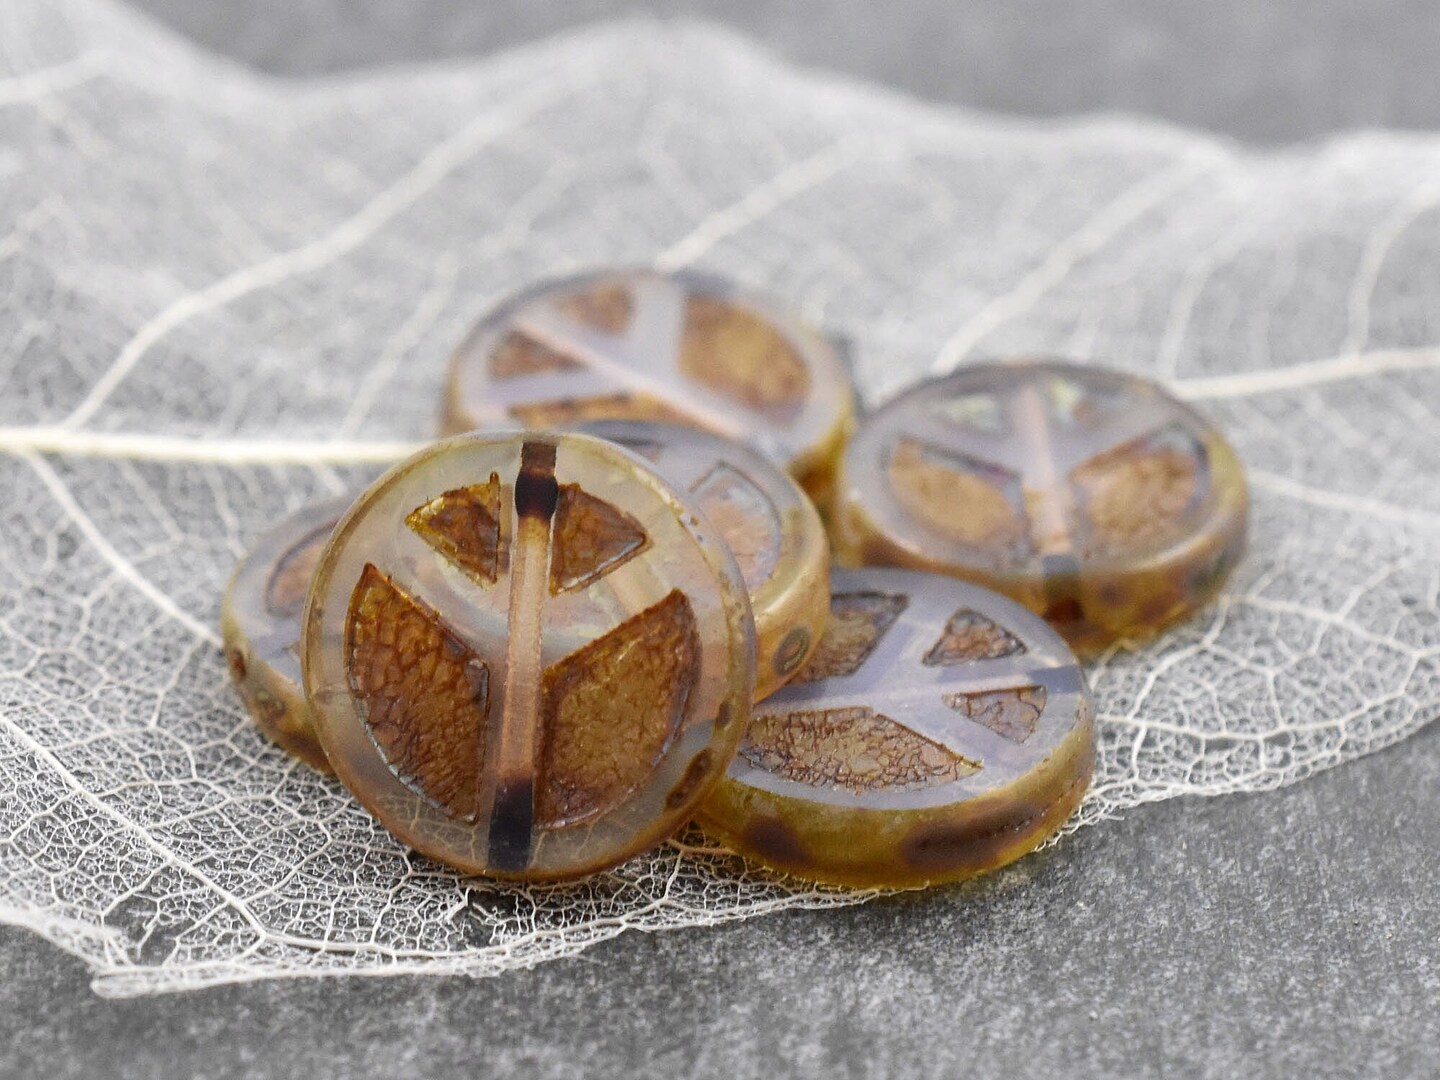 *15* 16x12mm Gold Washed Pale Thistle AB Top Drilled Dogwood Leaf Beads Czech Glass Beads by GR8BEADS - The Bead Obsession